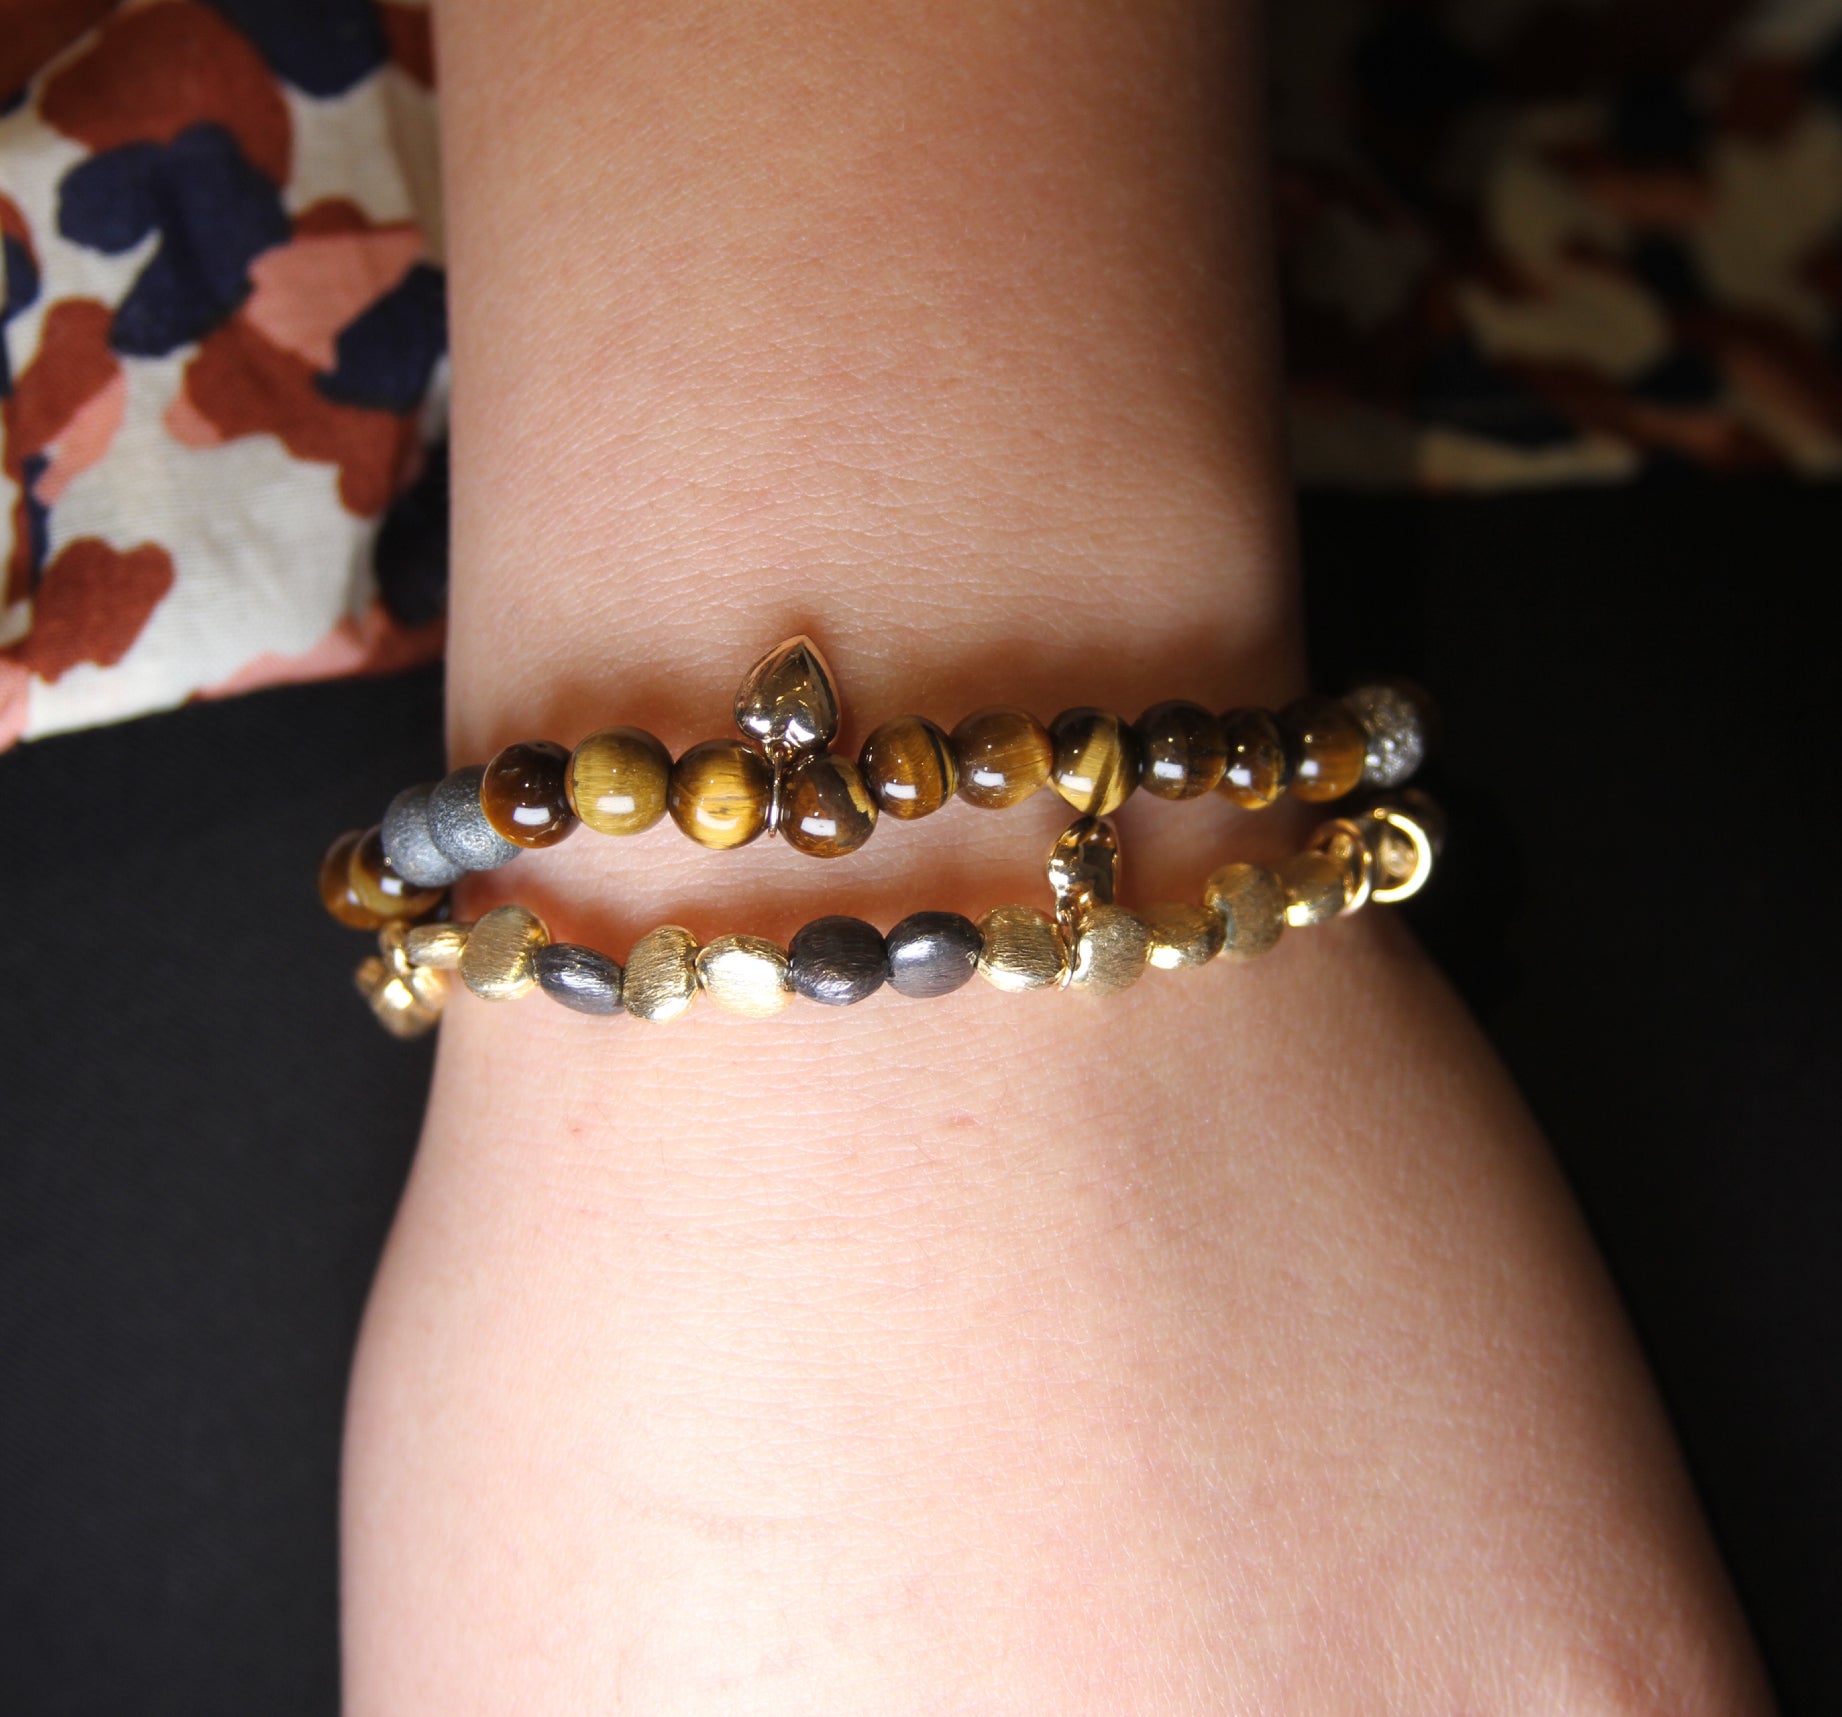 Tiger Eye Beaded Stackable Bracelet with Heart Charm